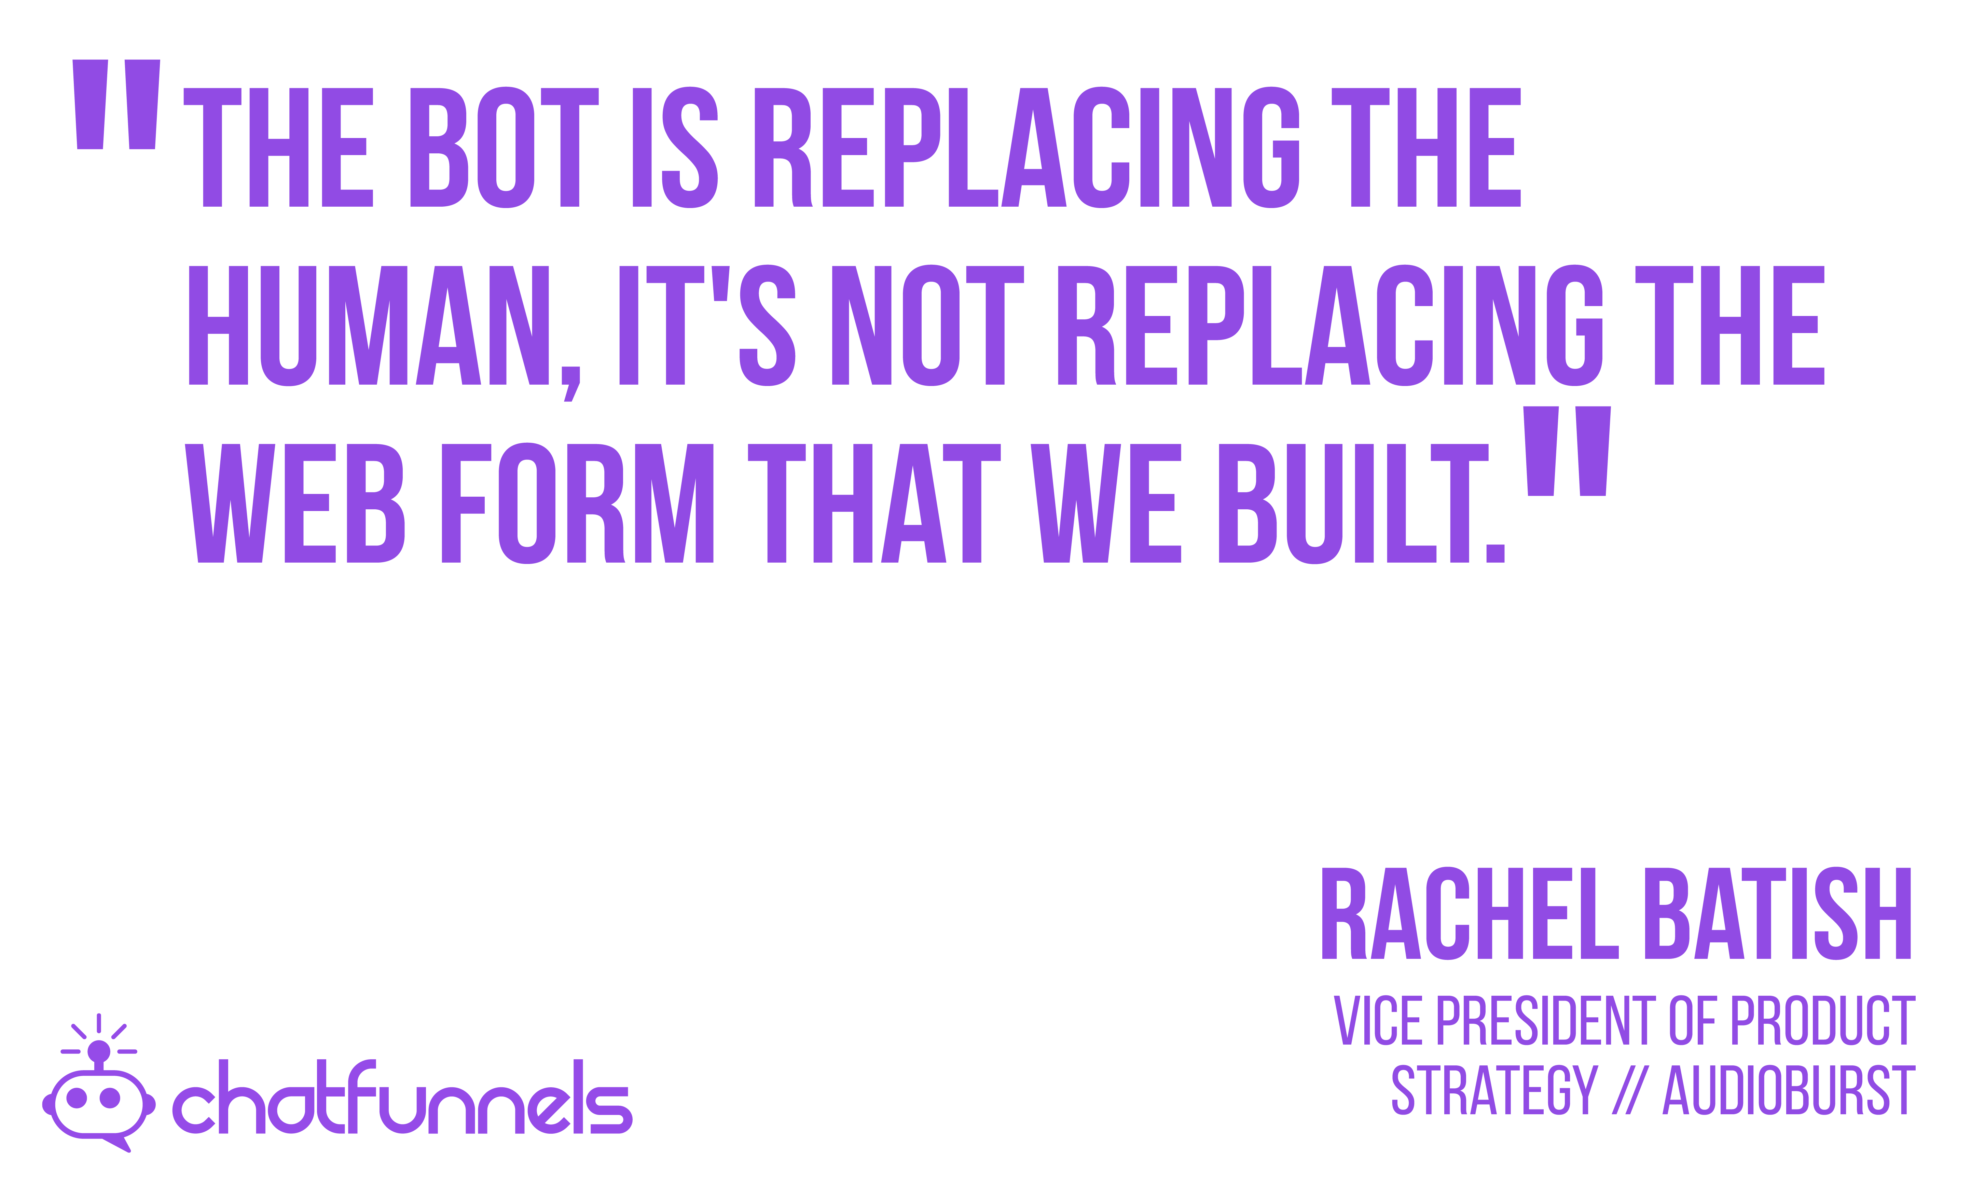 The bots is replacing the human, it's not replacing the web form that we built